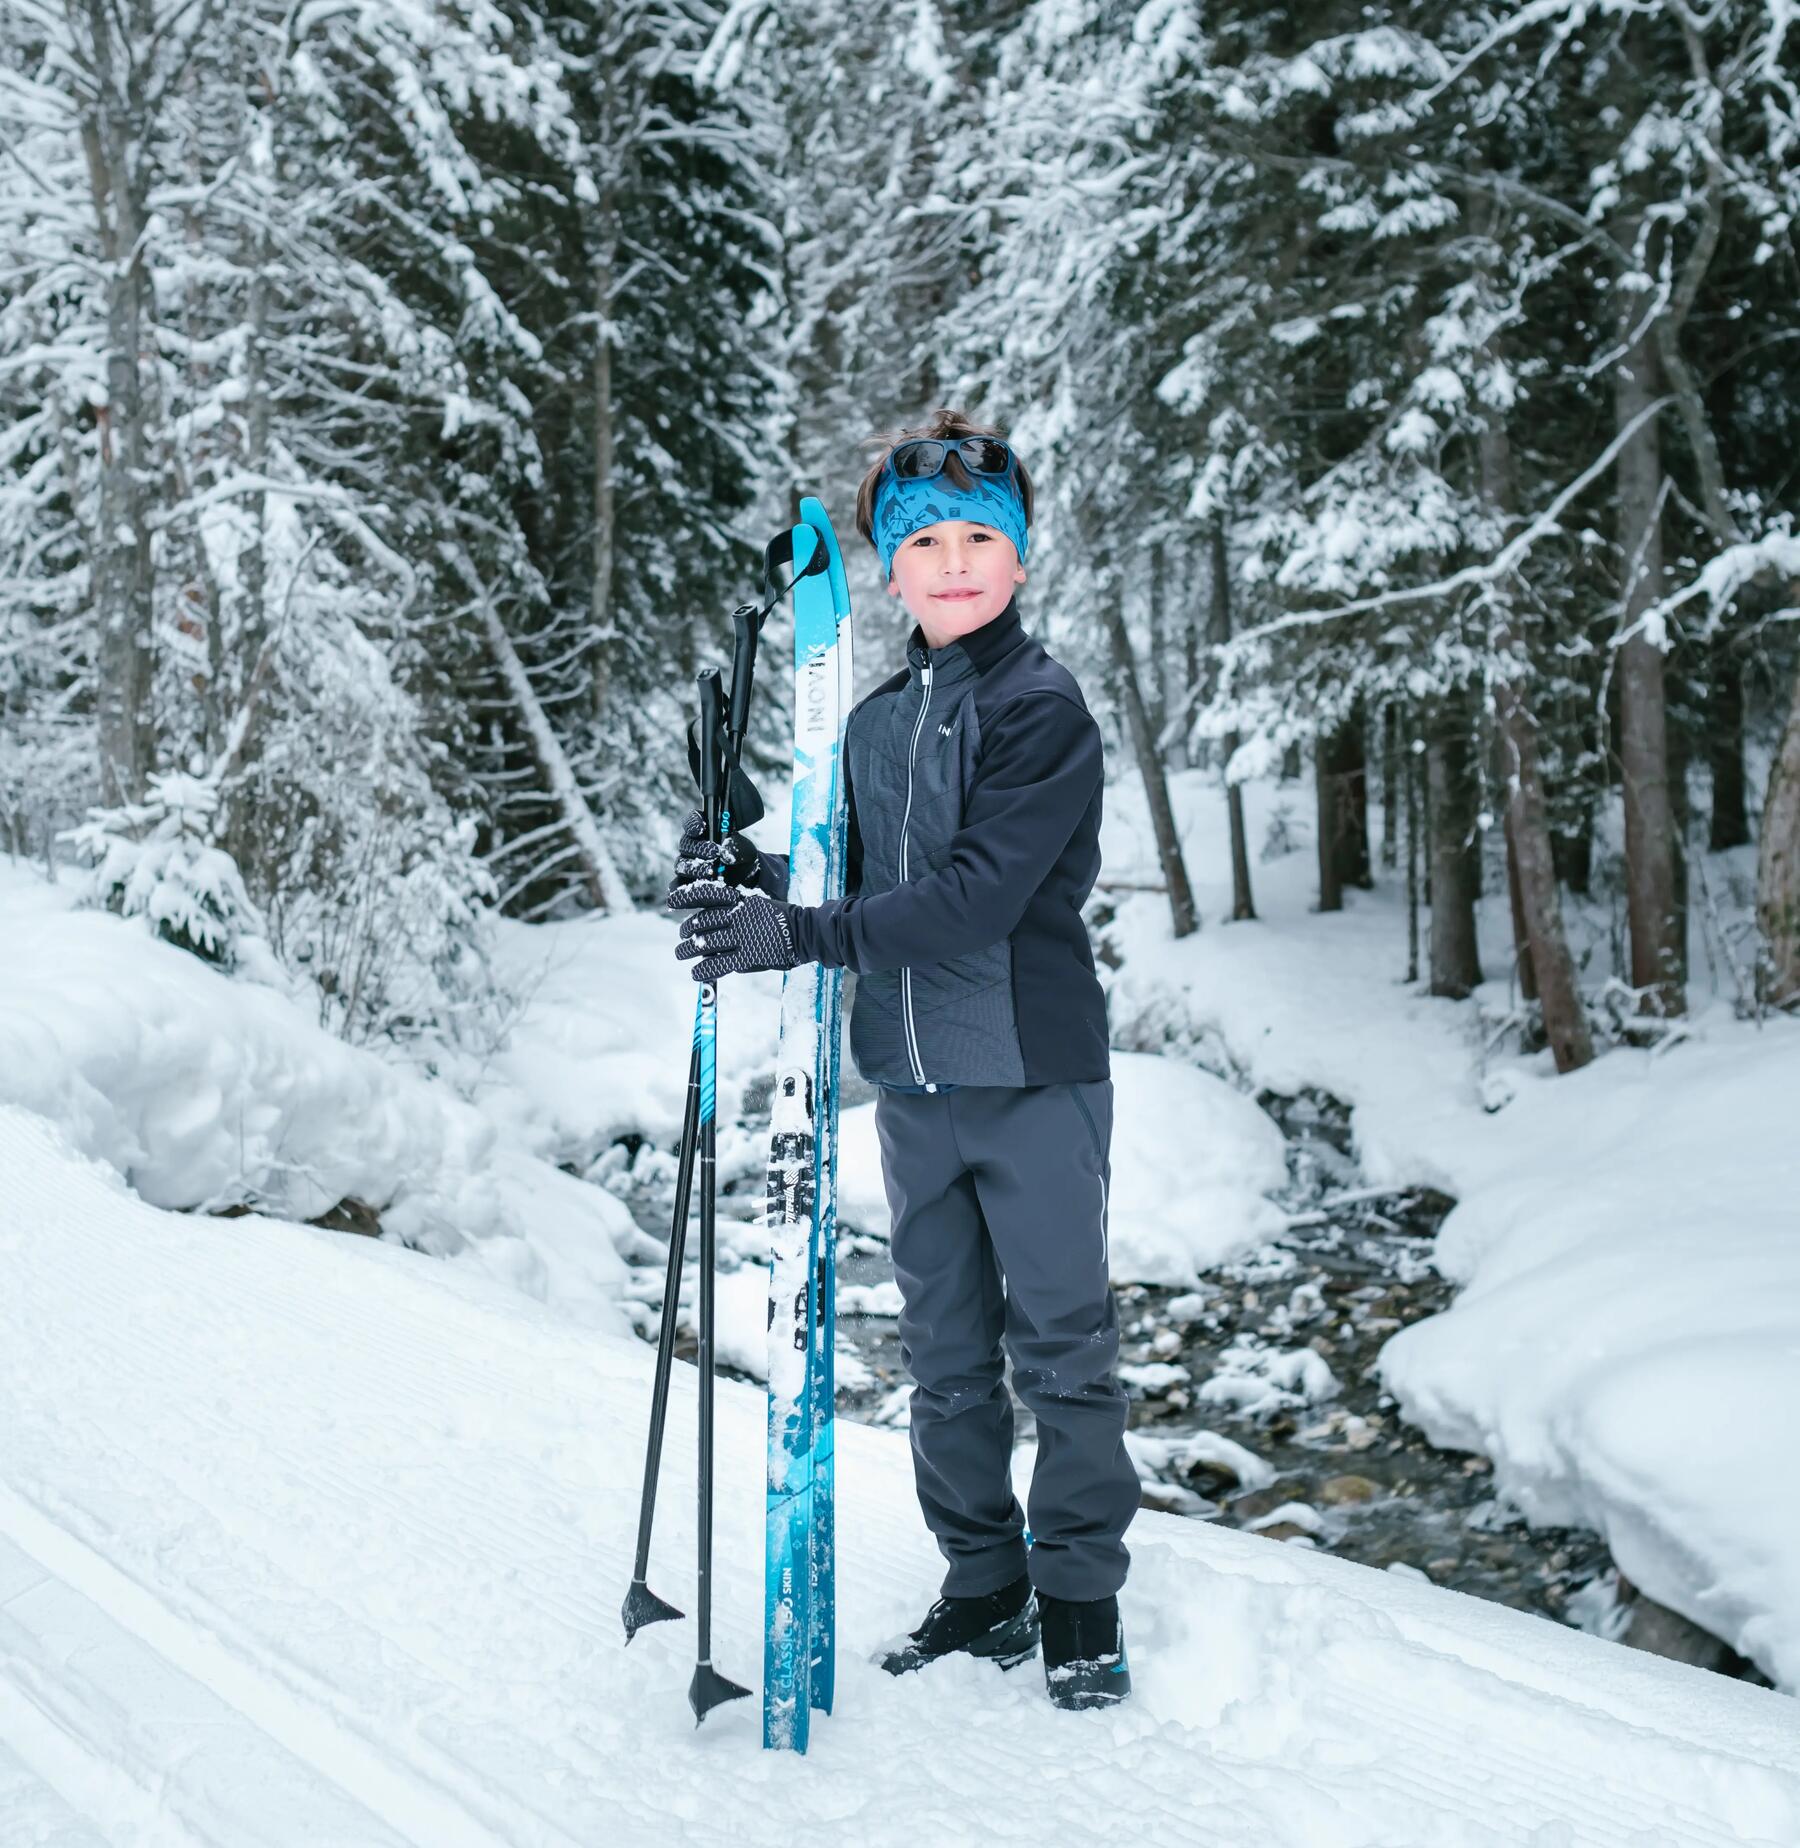 young boy holding cross-country skis and poles